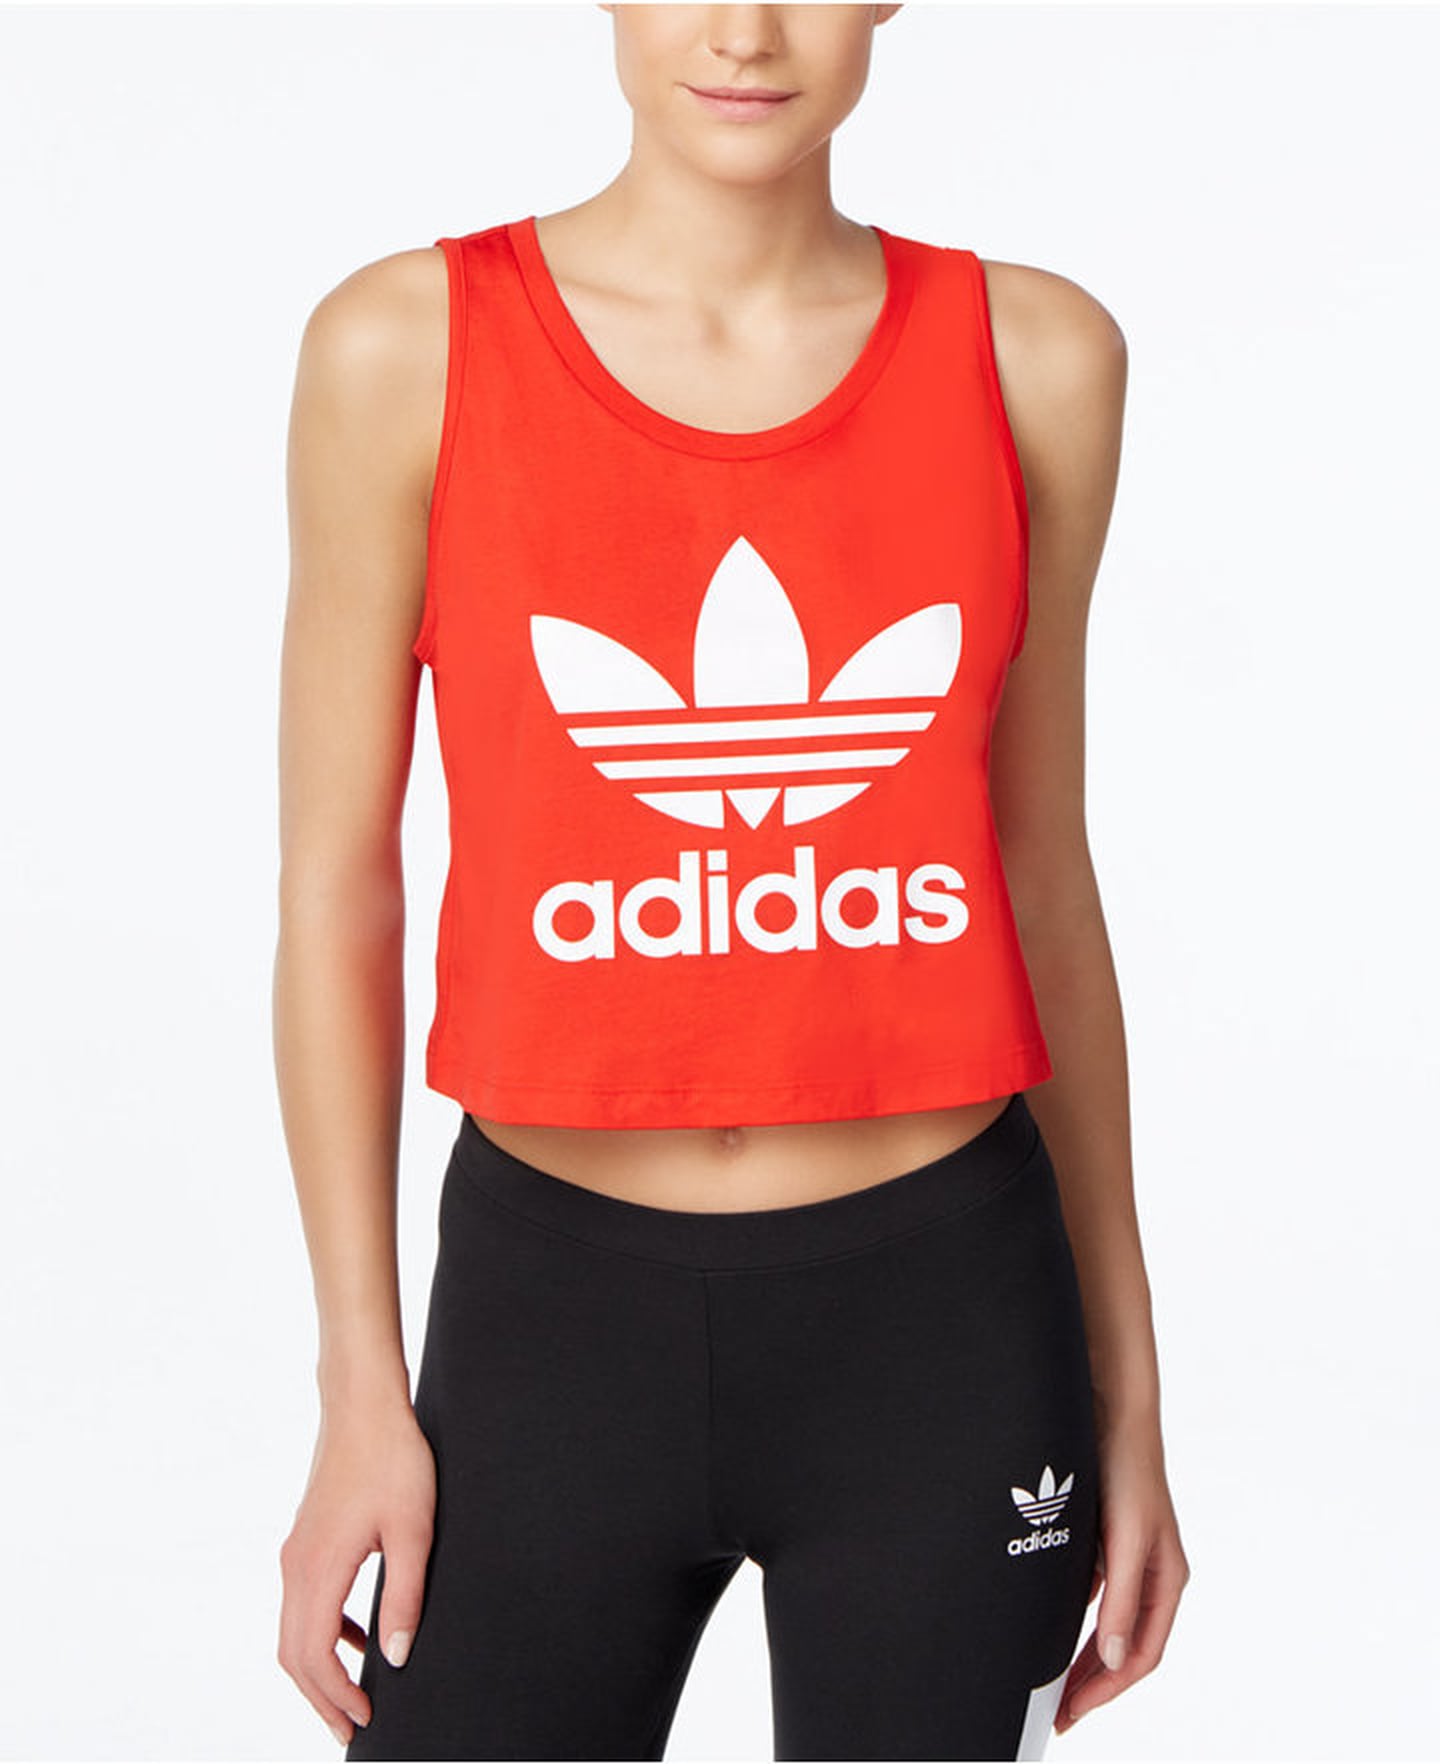 Best Clothes to Buy From Adidas | POPSUGAR Fashion